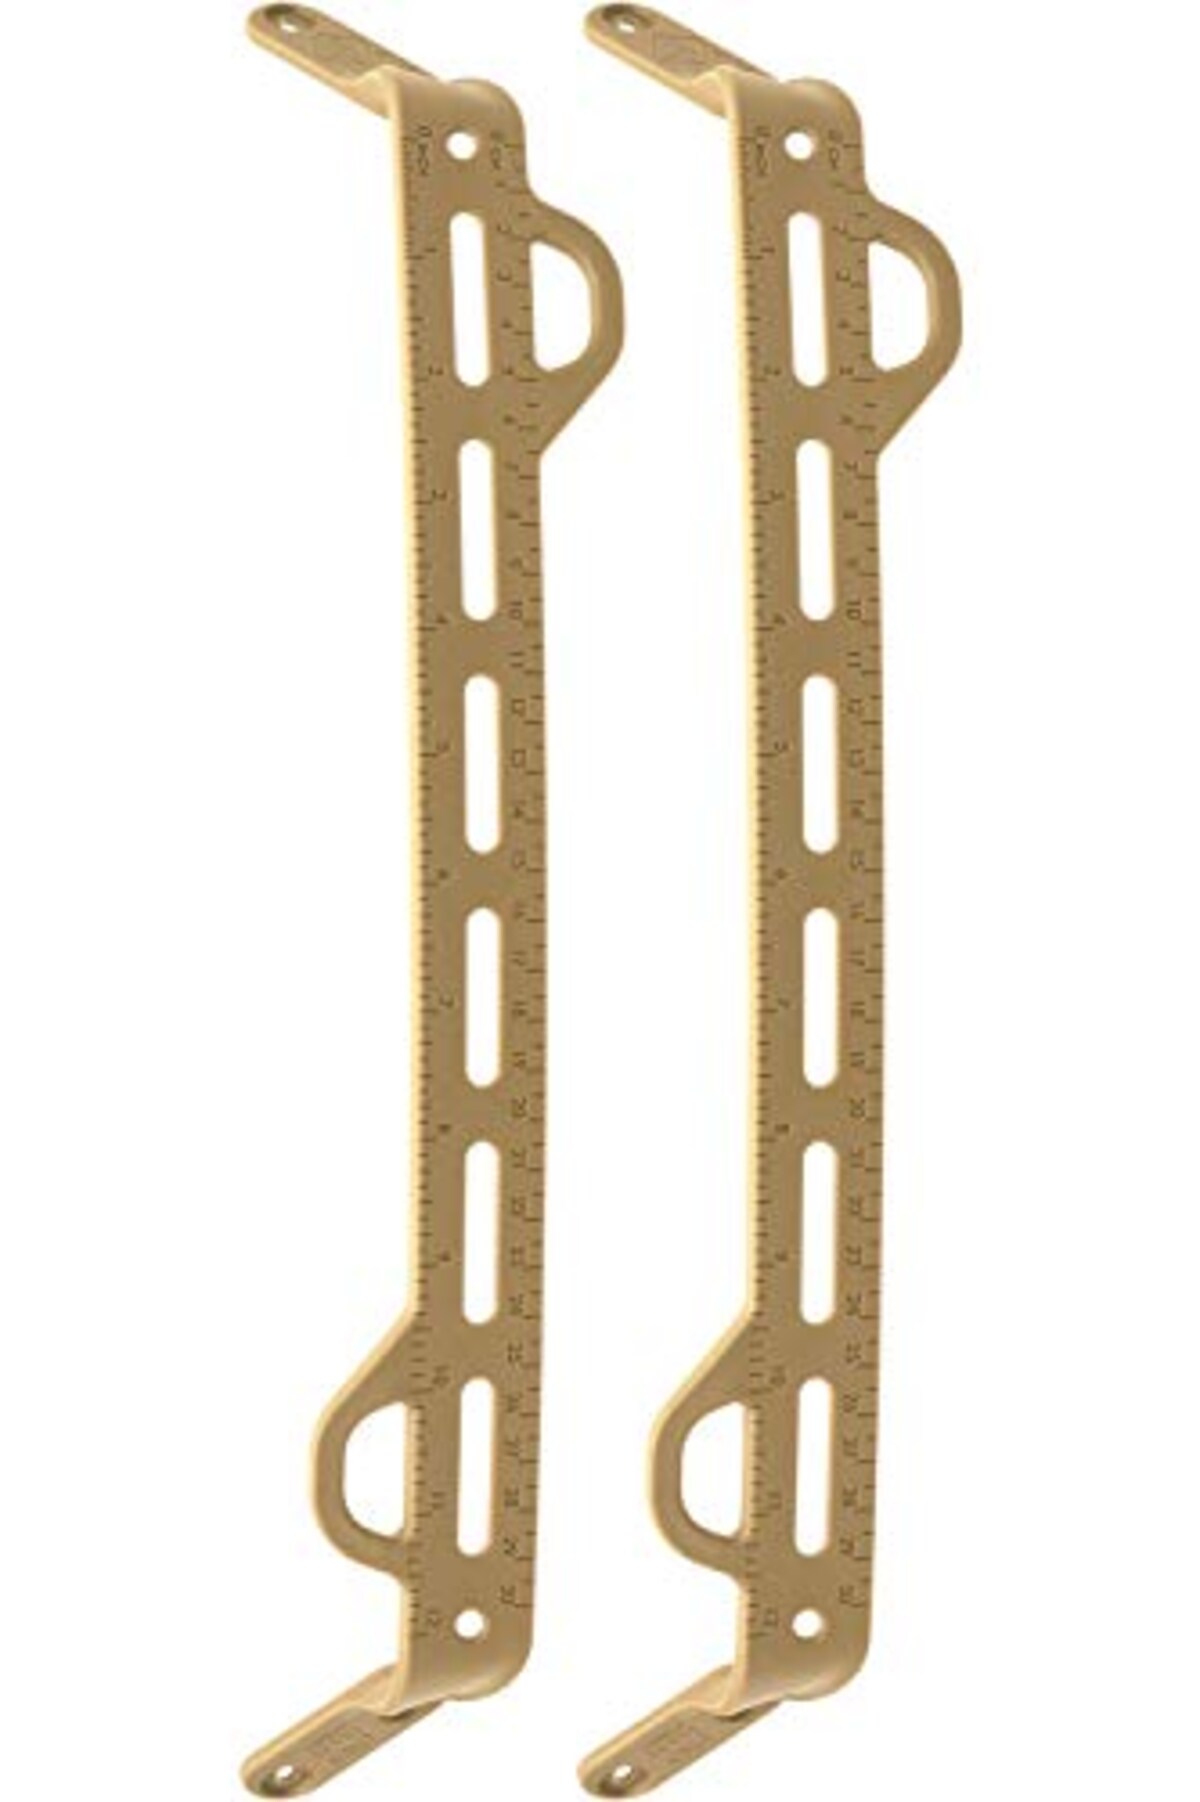 HardPoint Gear Rail (pack of 2) Coyote画像